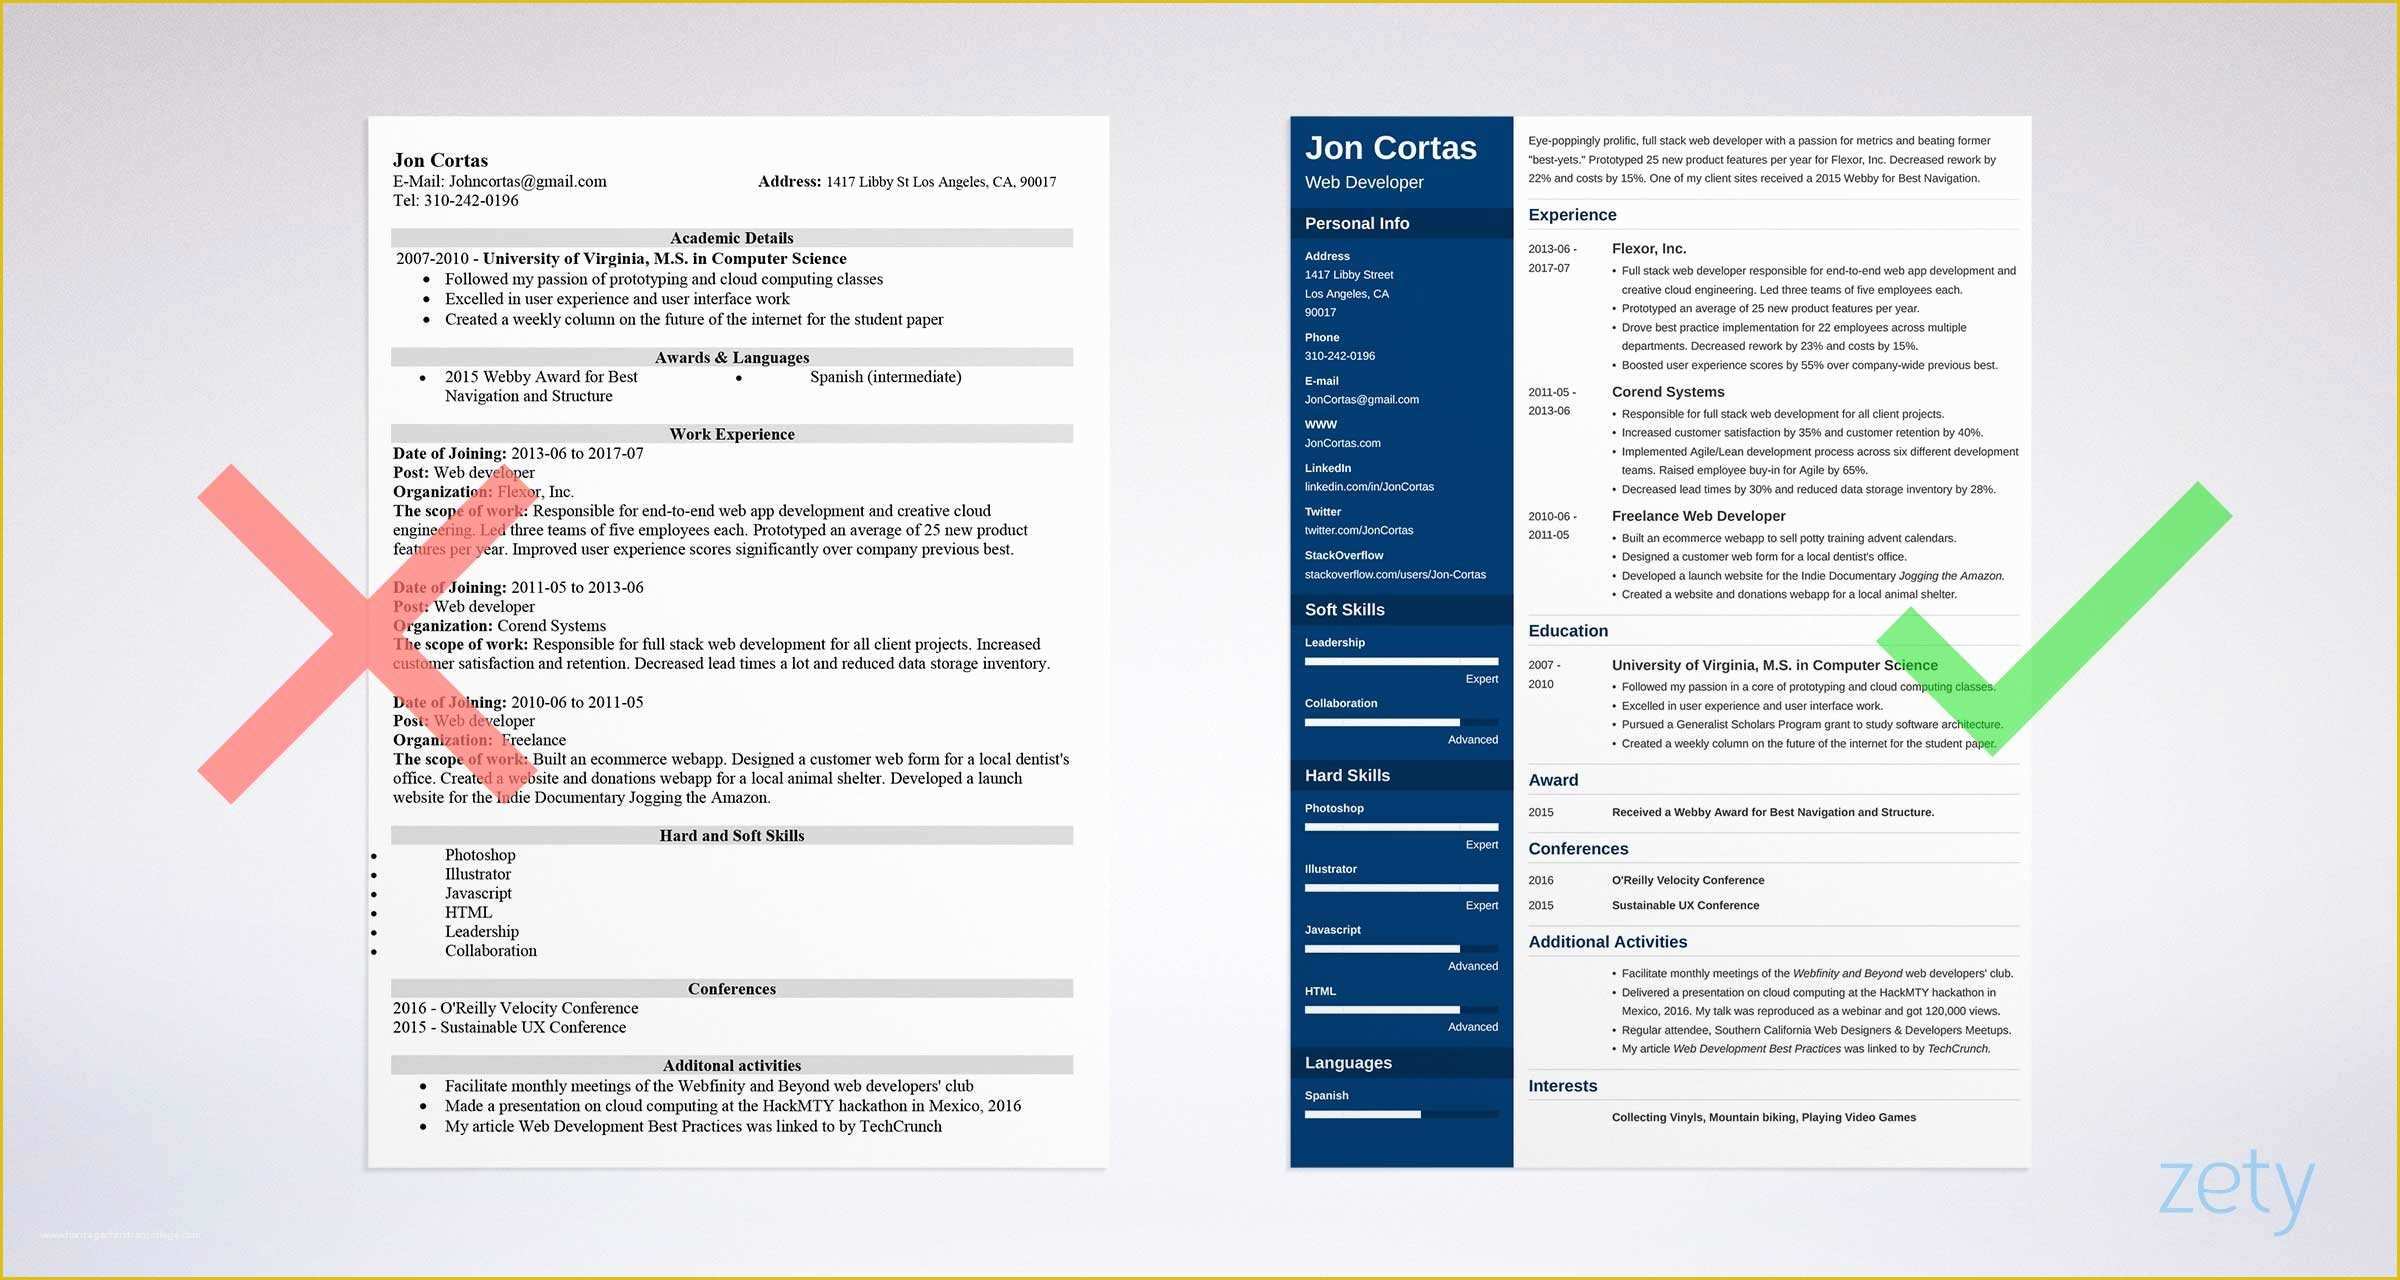 Cv Templates Free Download Word Document Of Free Resume Templates for Word 15 Cv Resume formats to